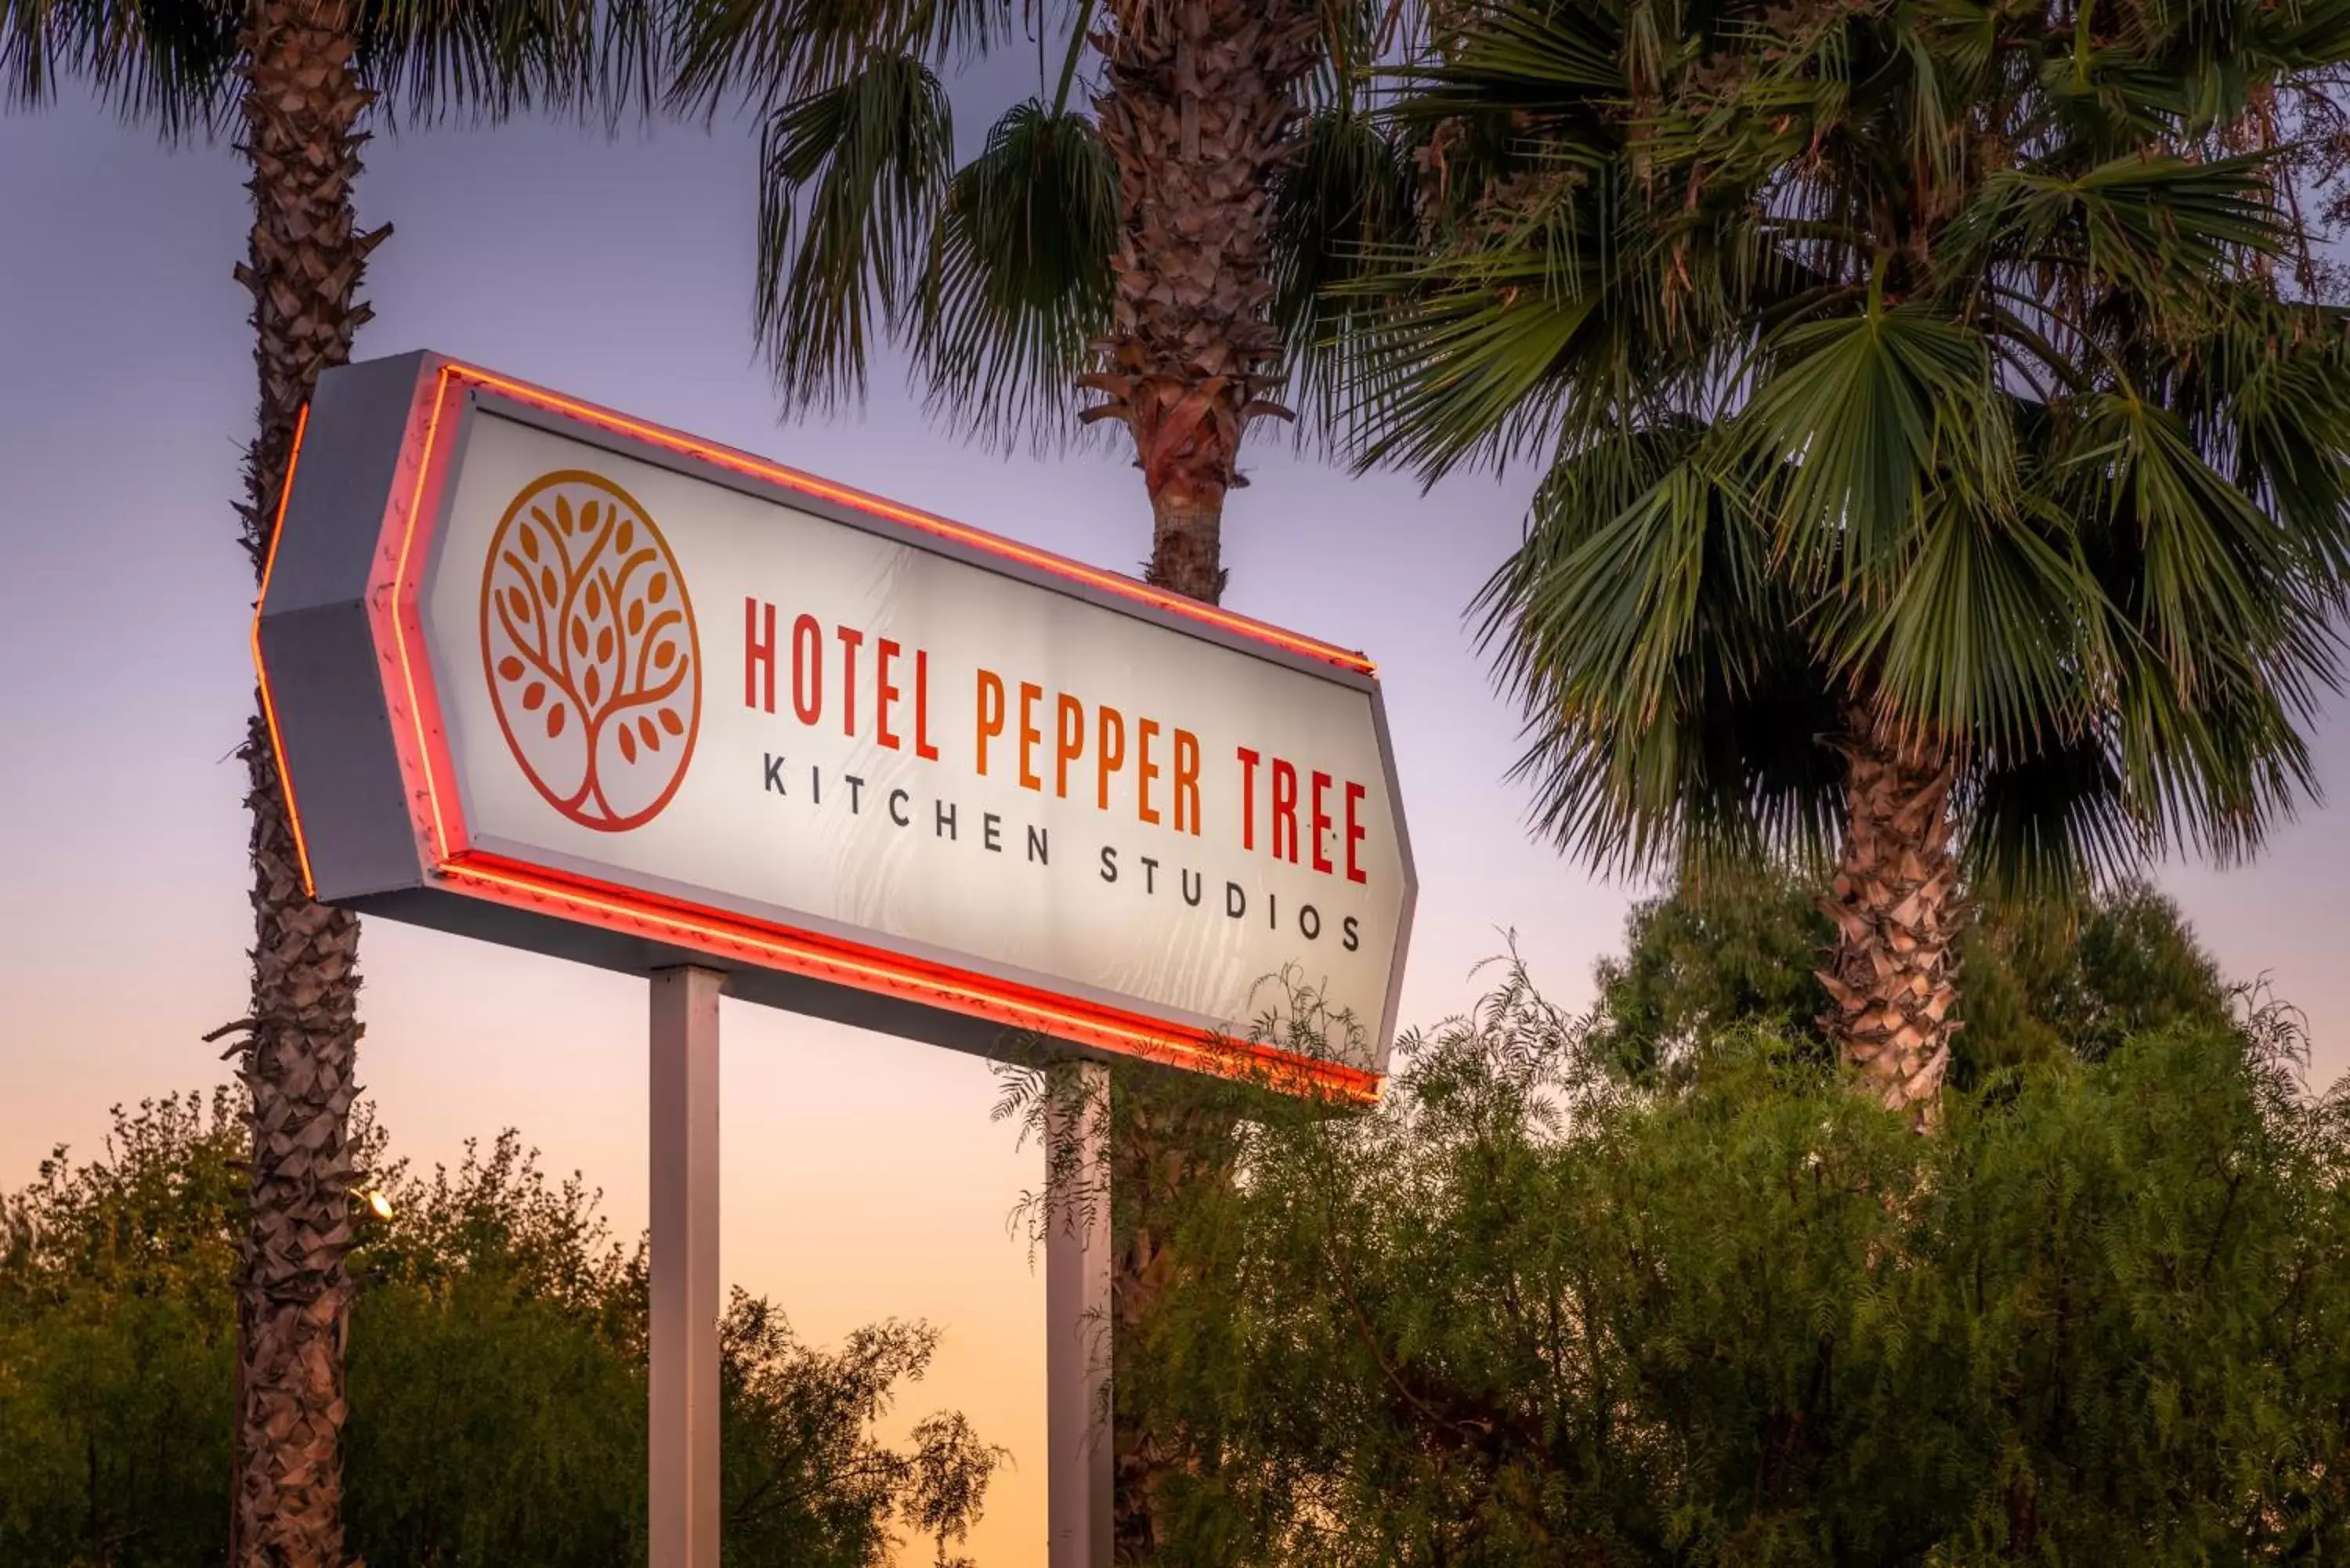 Property logo or sign, Property Building in Hotel Pepper Tree Boutique Kitchen Studios - Anaheim